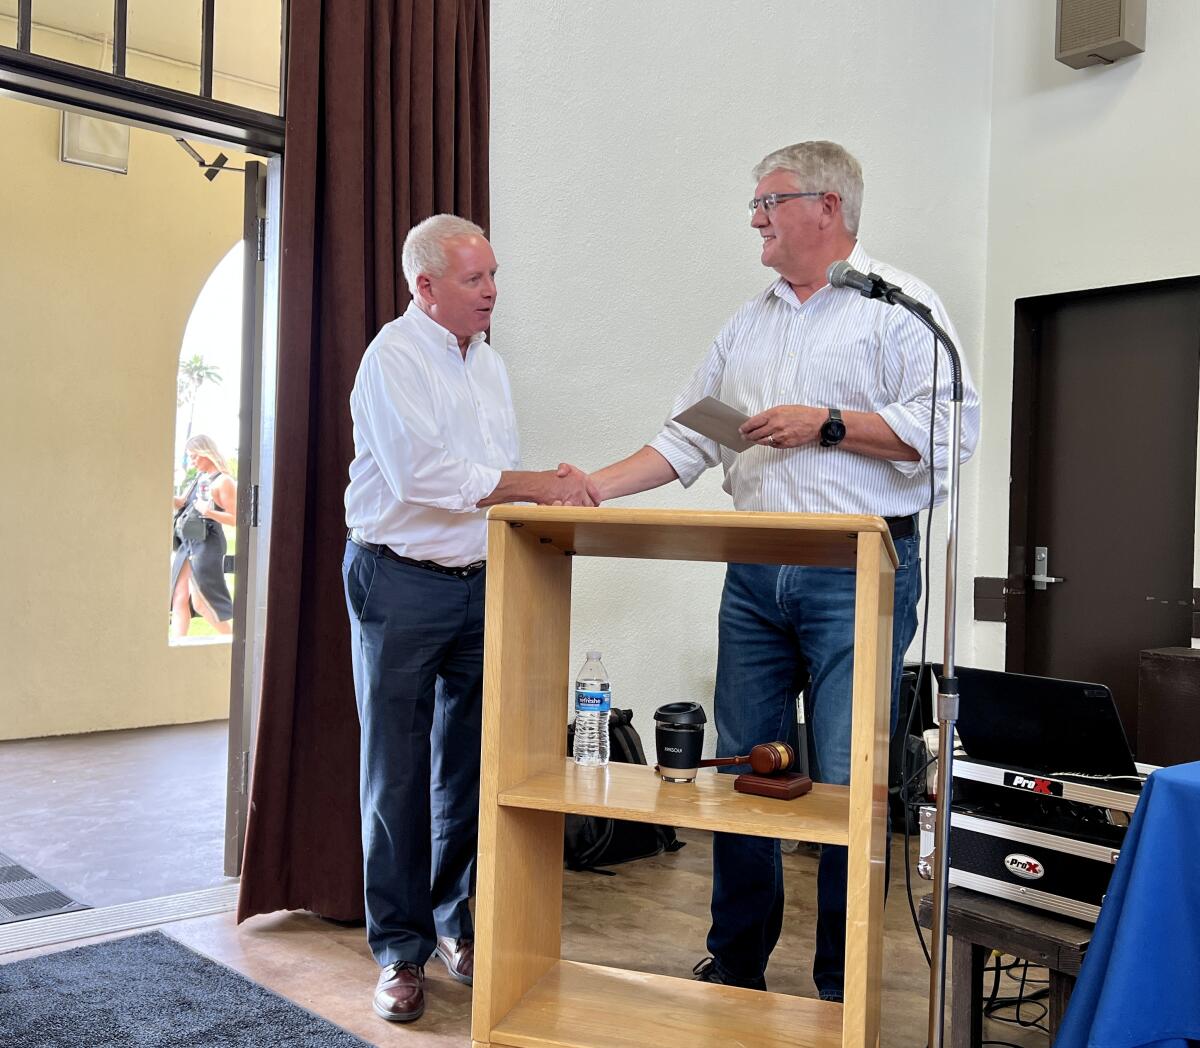 Town Council trustee Peter Wulff (right) thanks San Diego city representative Steve Hadley for his service.